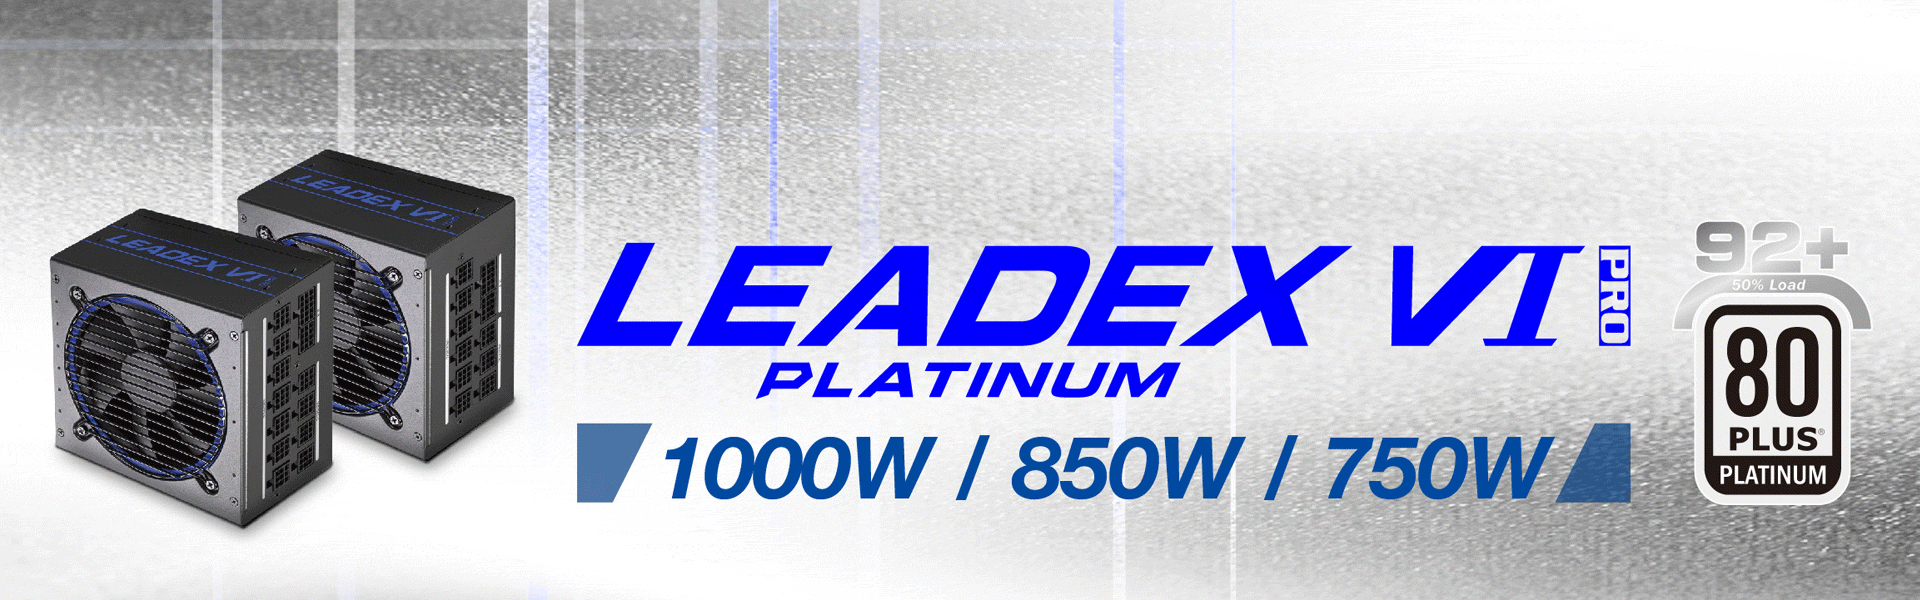 LEADEX III GOLD 850W PCIe 5.0 (WH) Super Flower